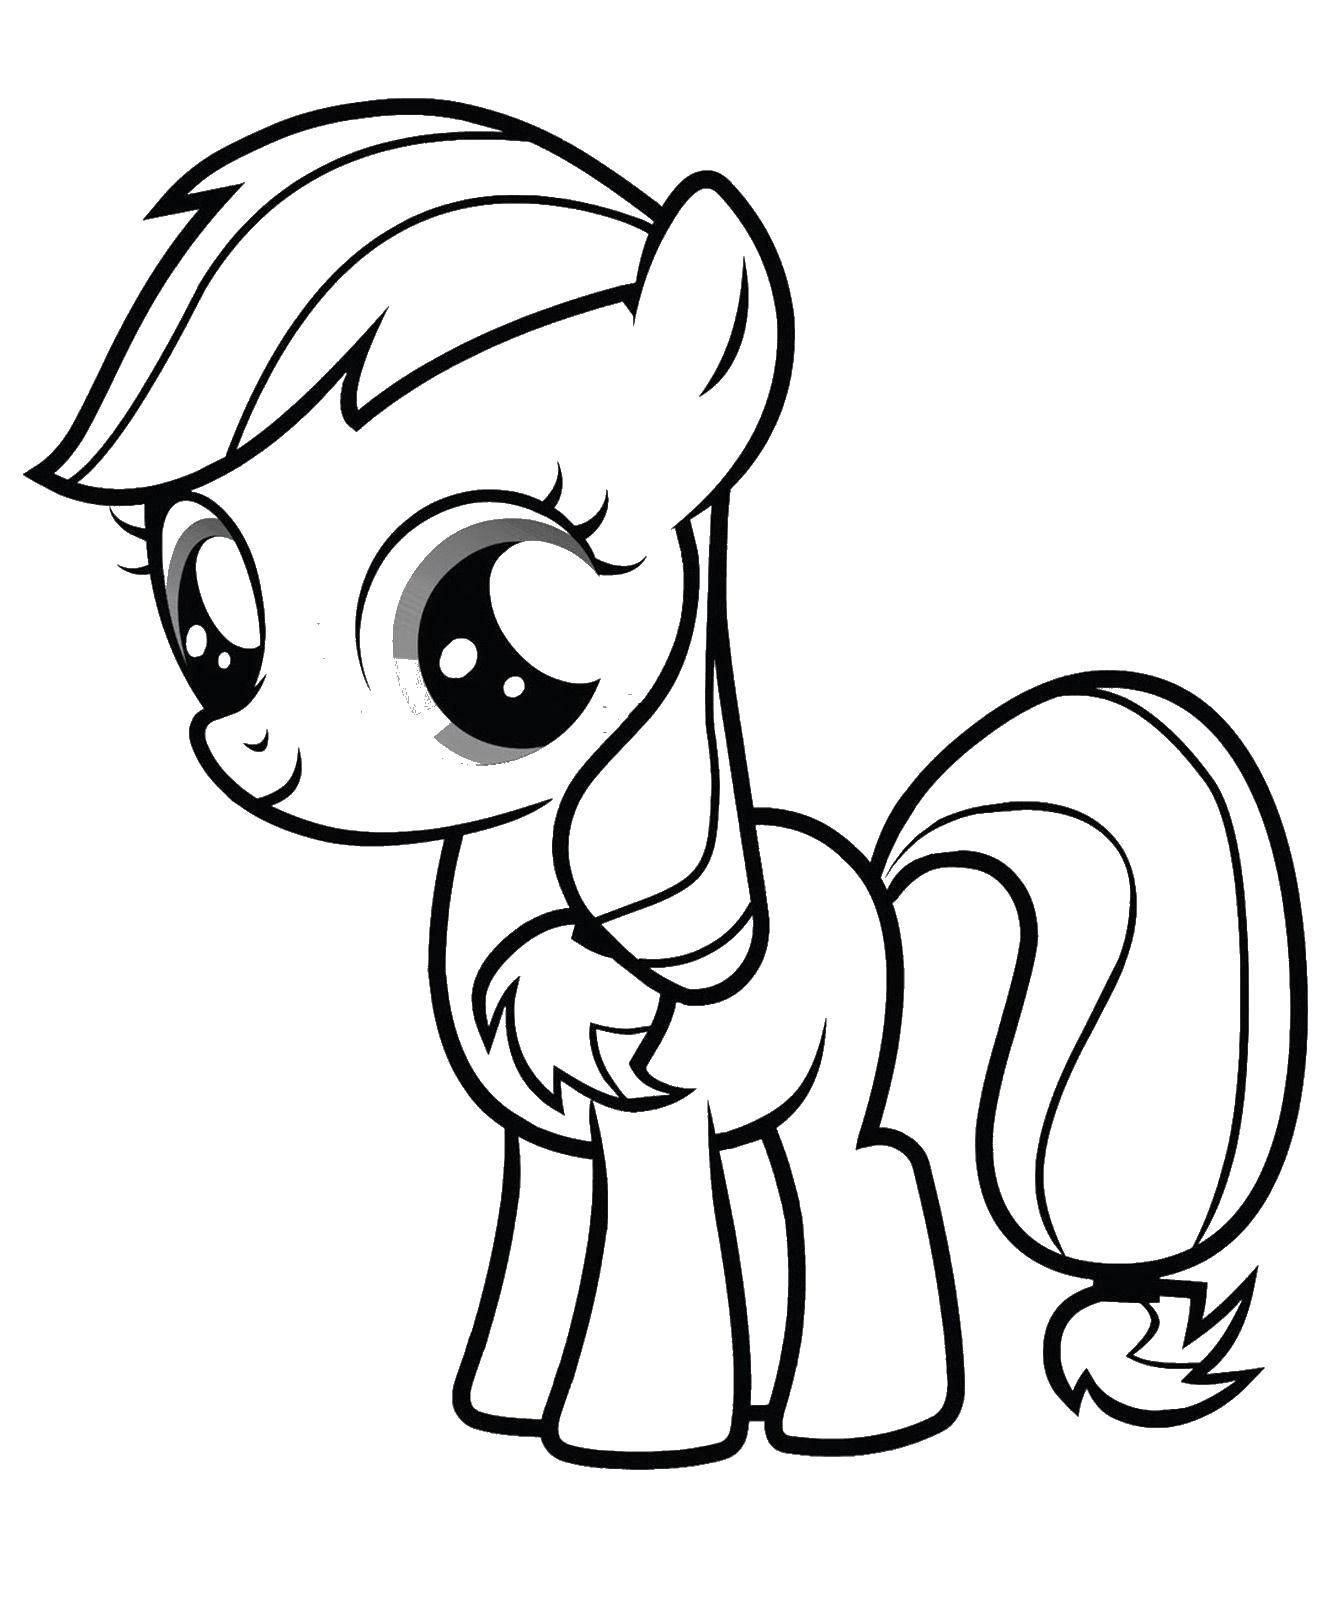 Coloring Little Apple. Category my little pony. Tags:  Apple Jack, pony.